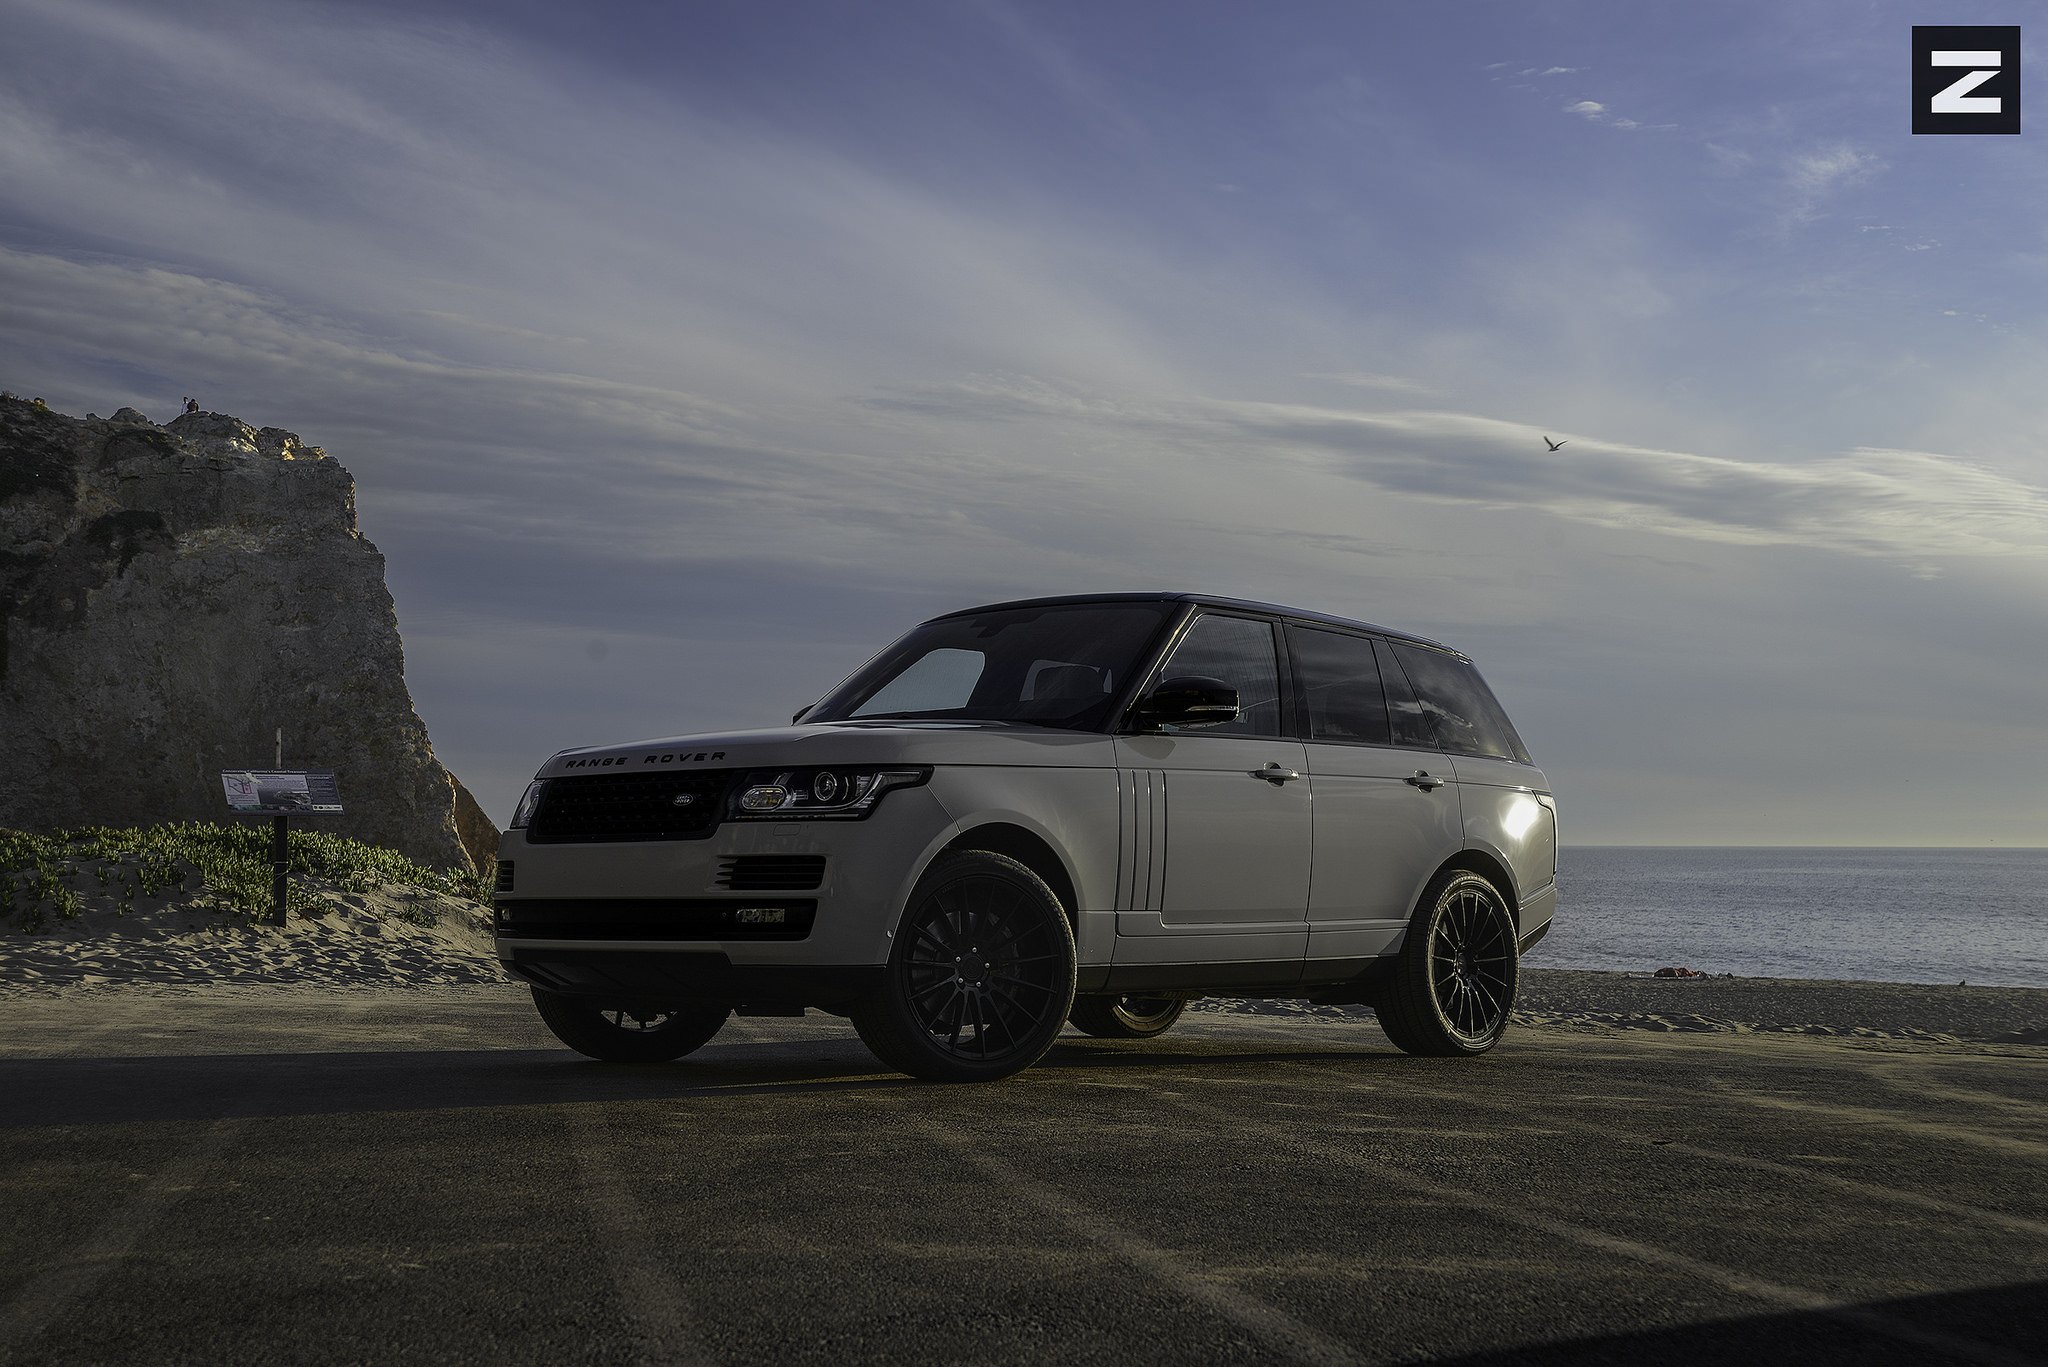 Front Bumper with Fog Lights on White Range Rover - Photo by Zito Wheels